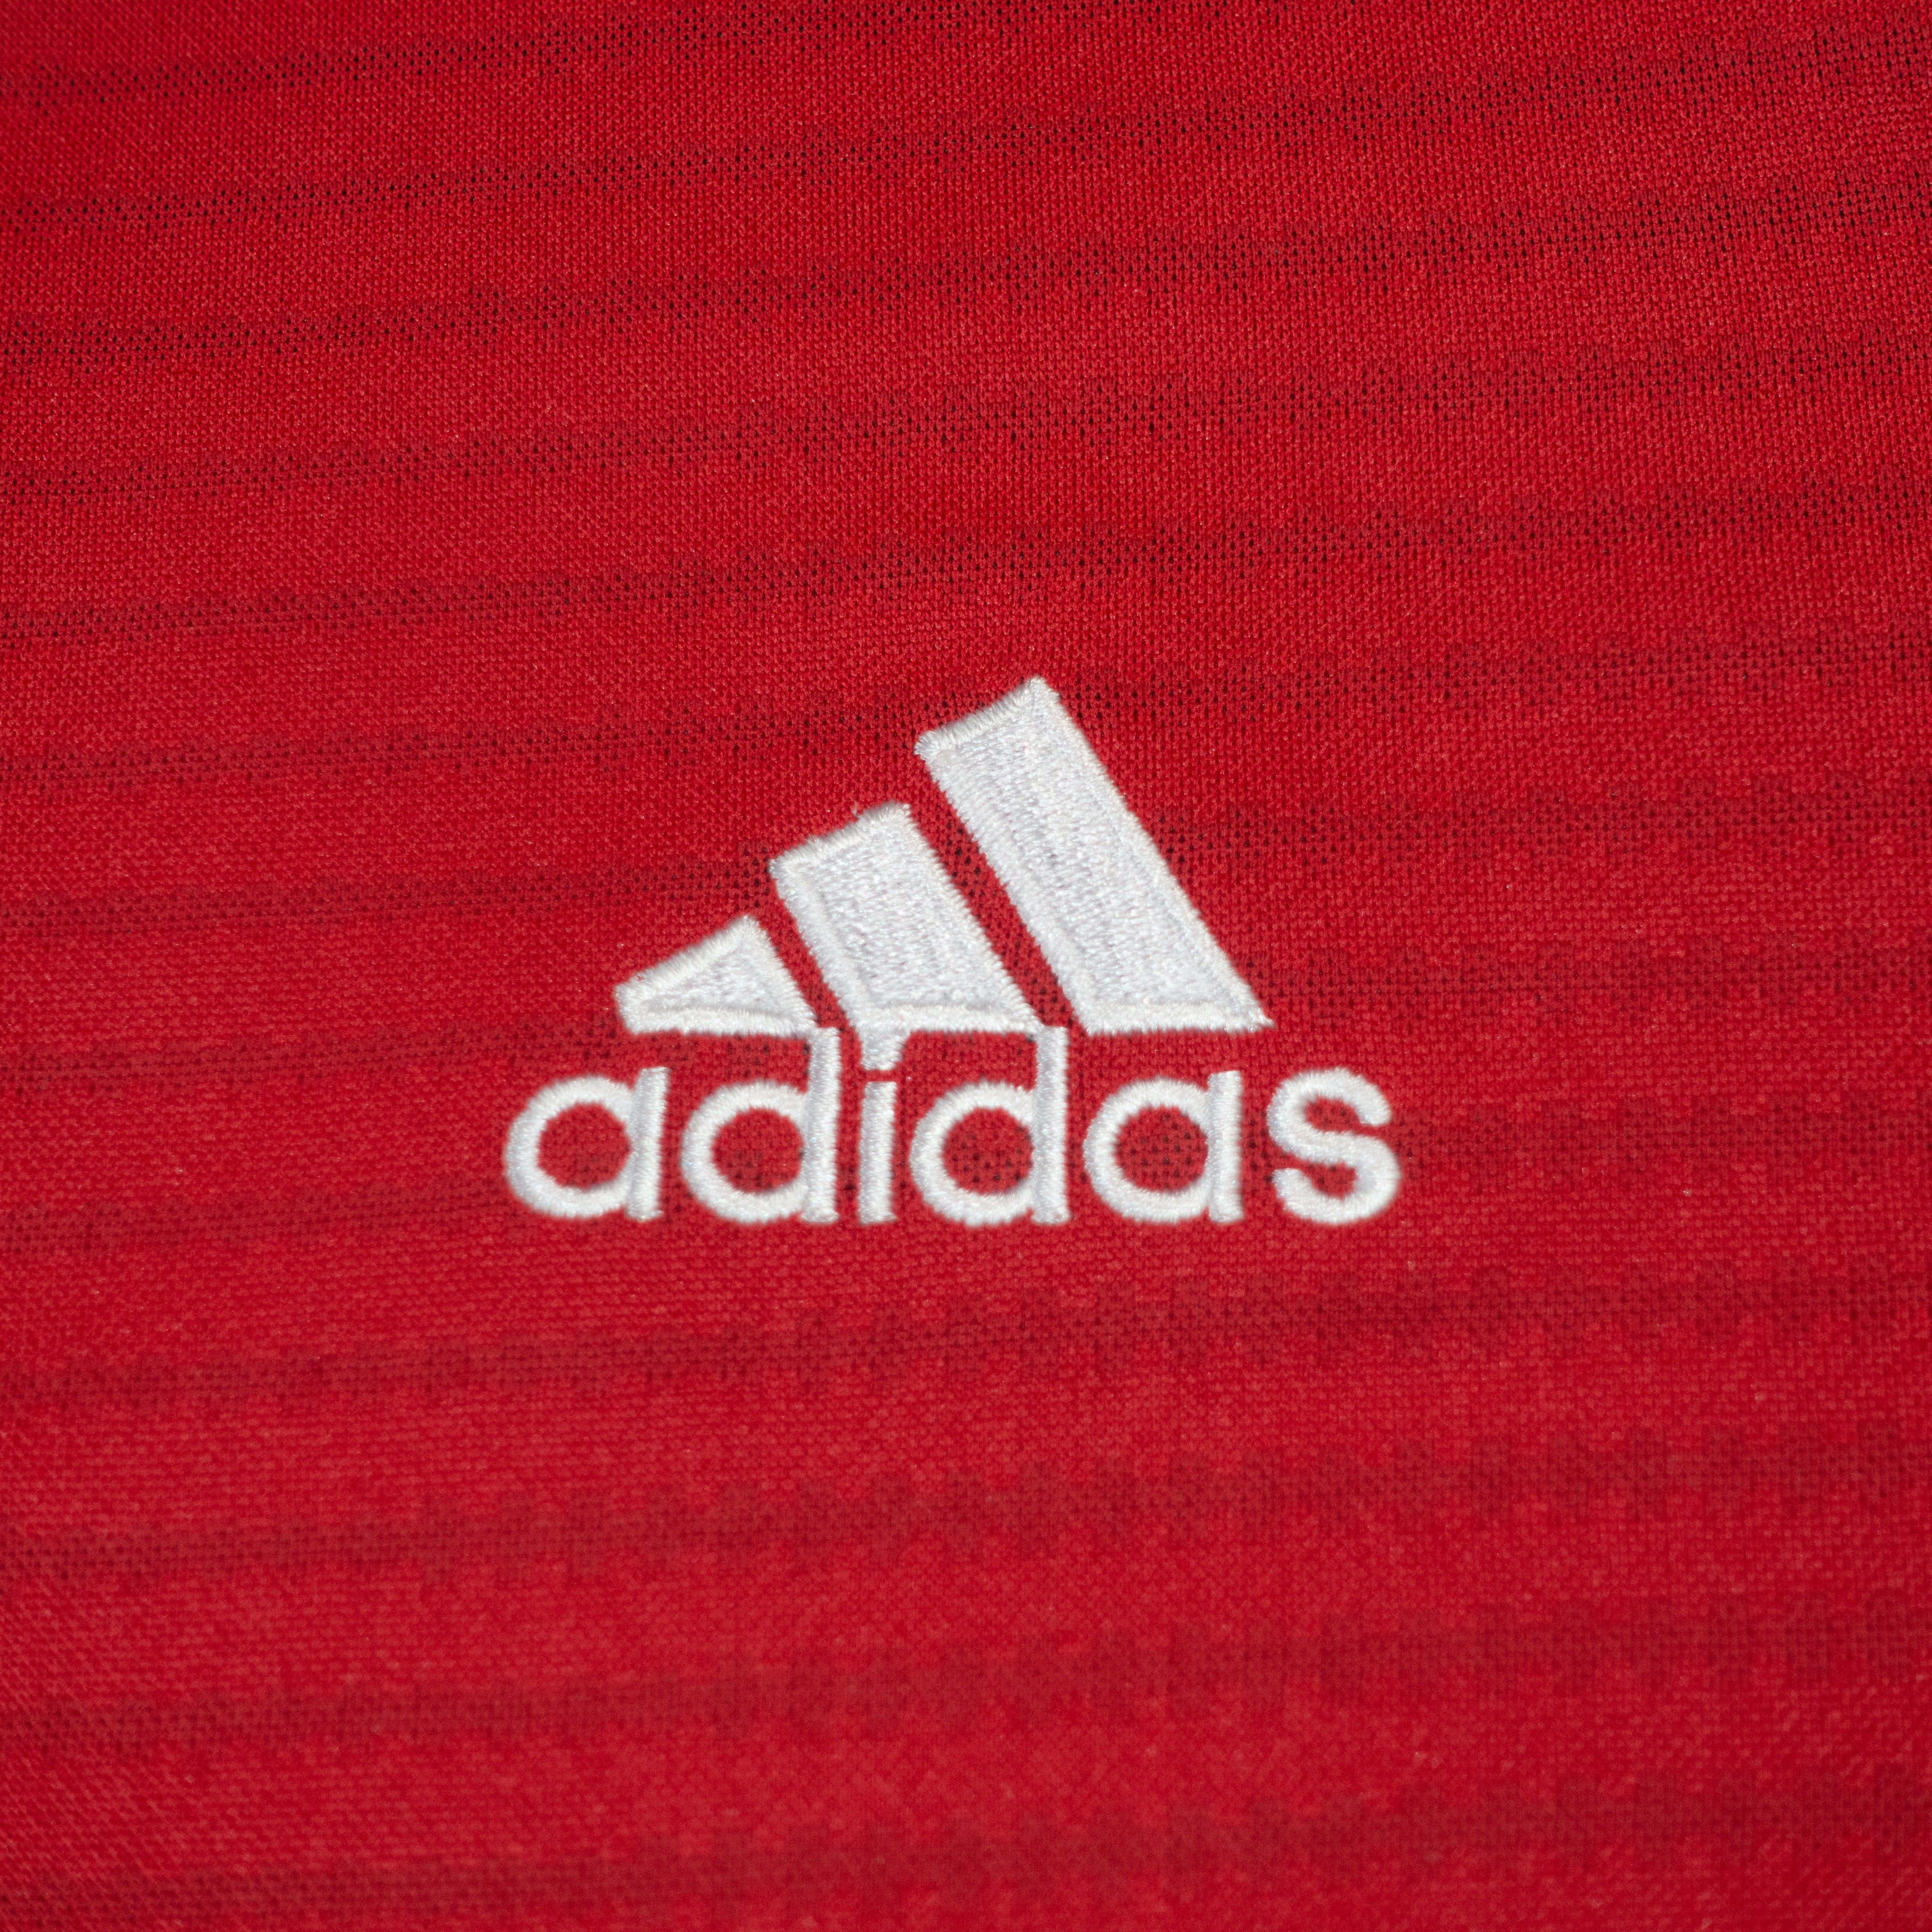 Rework Manchester United Adidas Cropped Tee